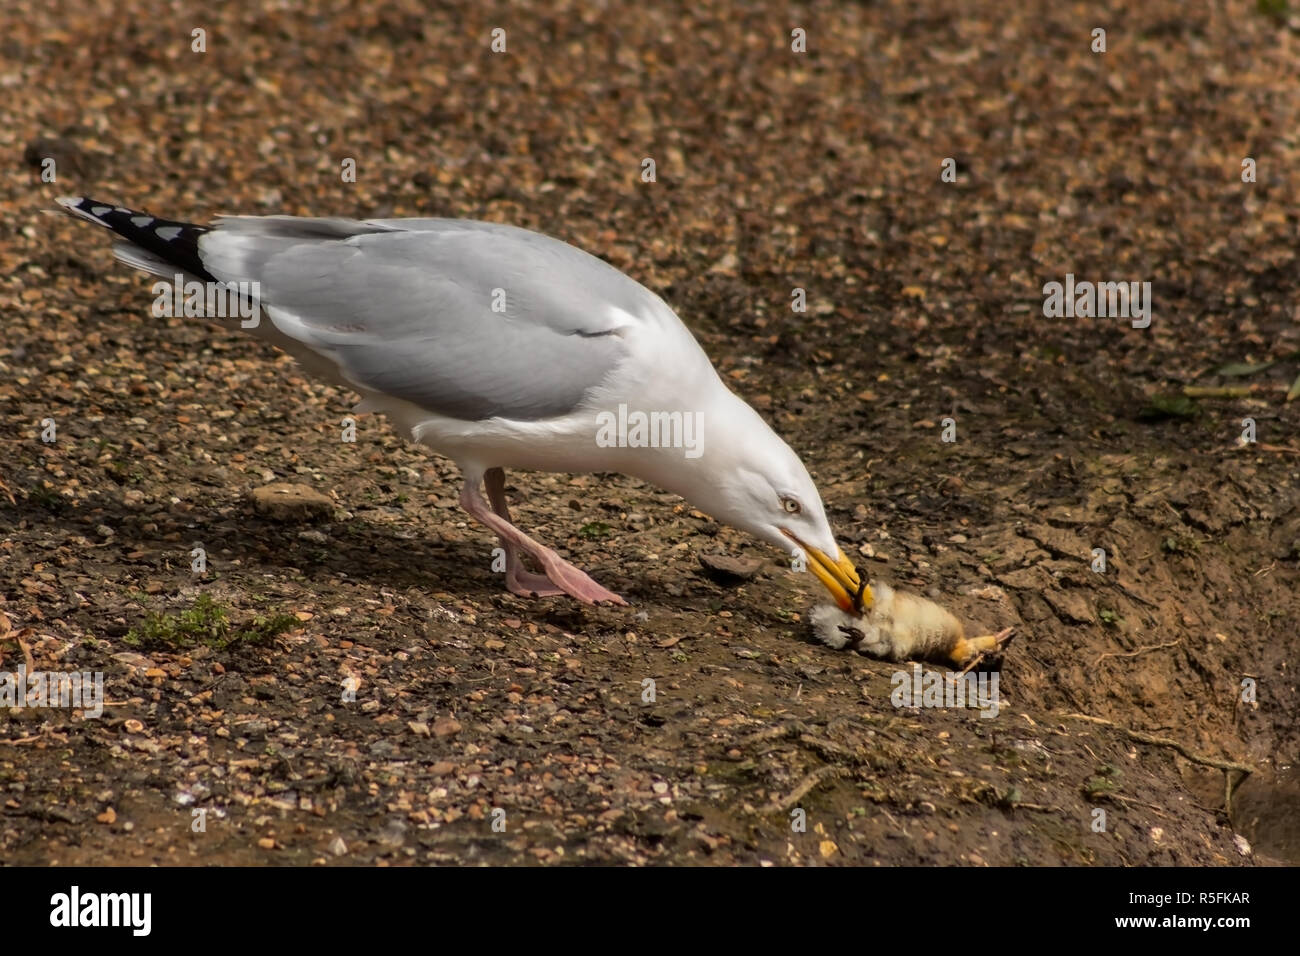 Herring Gull gathering a a recently killed duckling for food Stock Photo